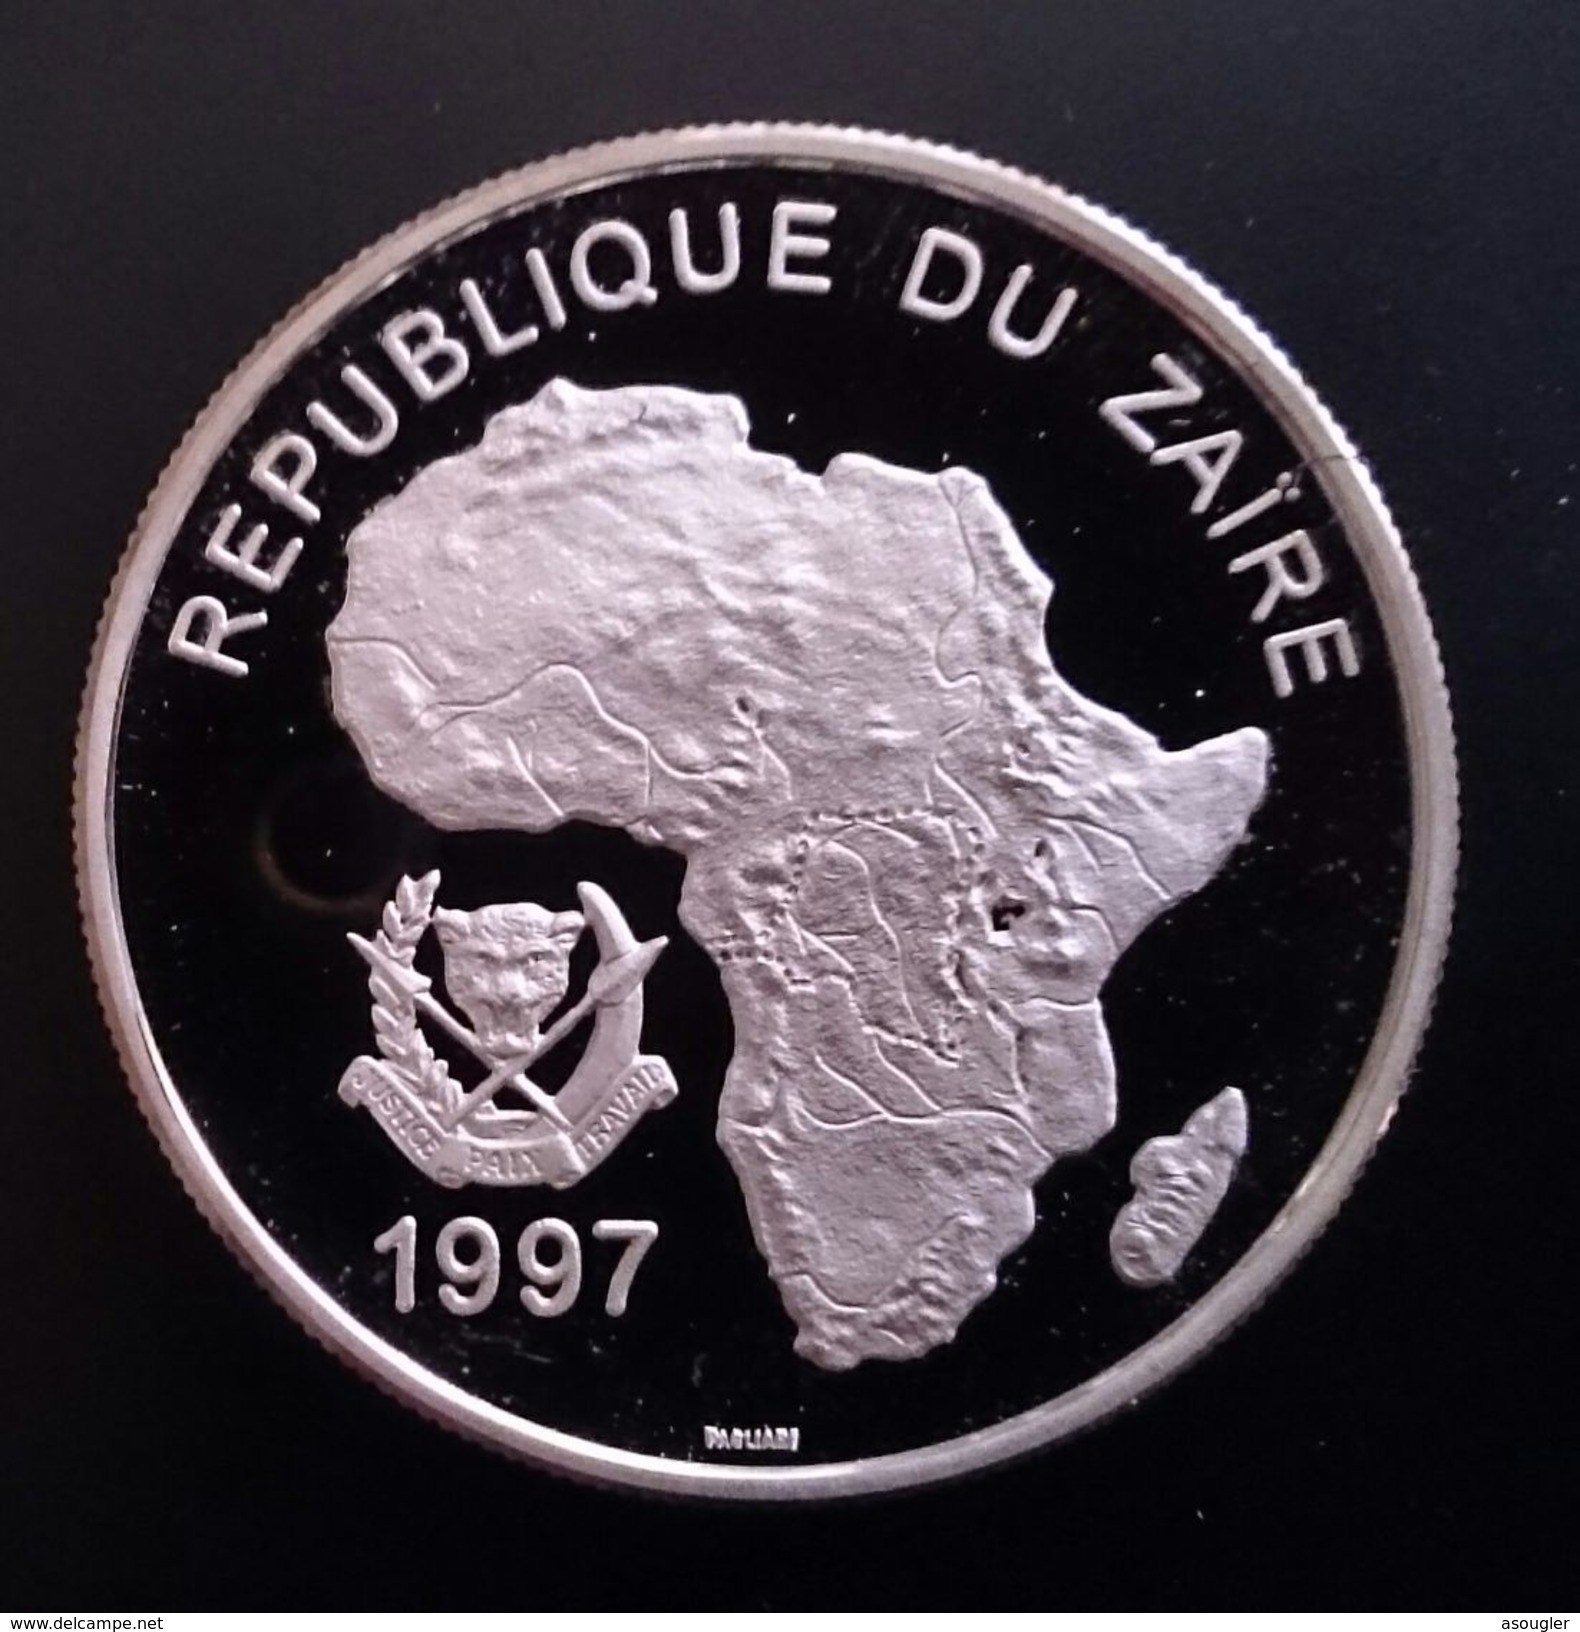 ZAIRE 1000 NOUVEAUX ZAIRES 1997 SILVER PROOF "Wildlife Of Africa" Free Shipping Via Registered Air Mail - Zaire (1971-97)